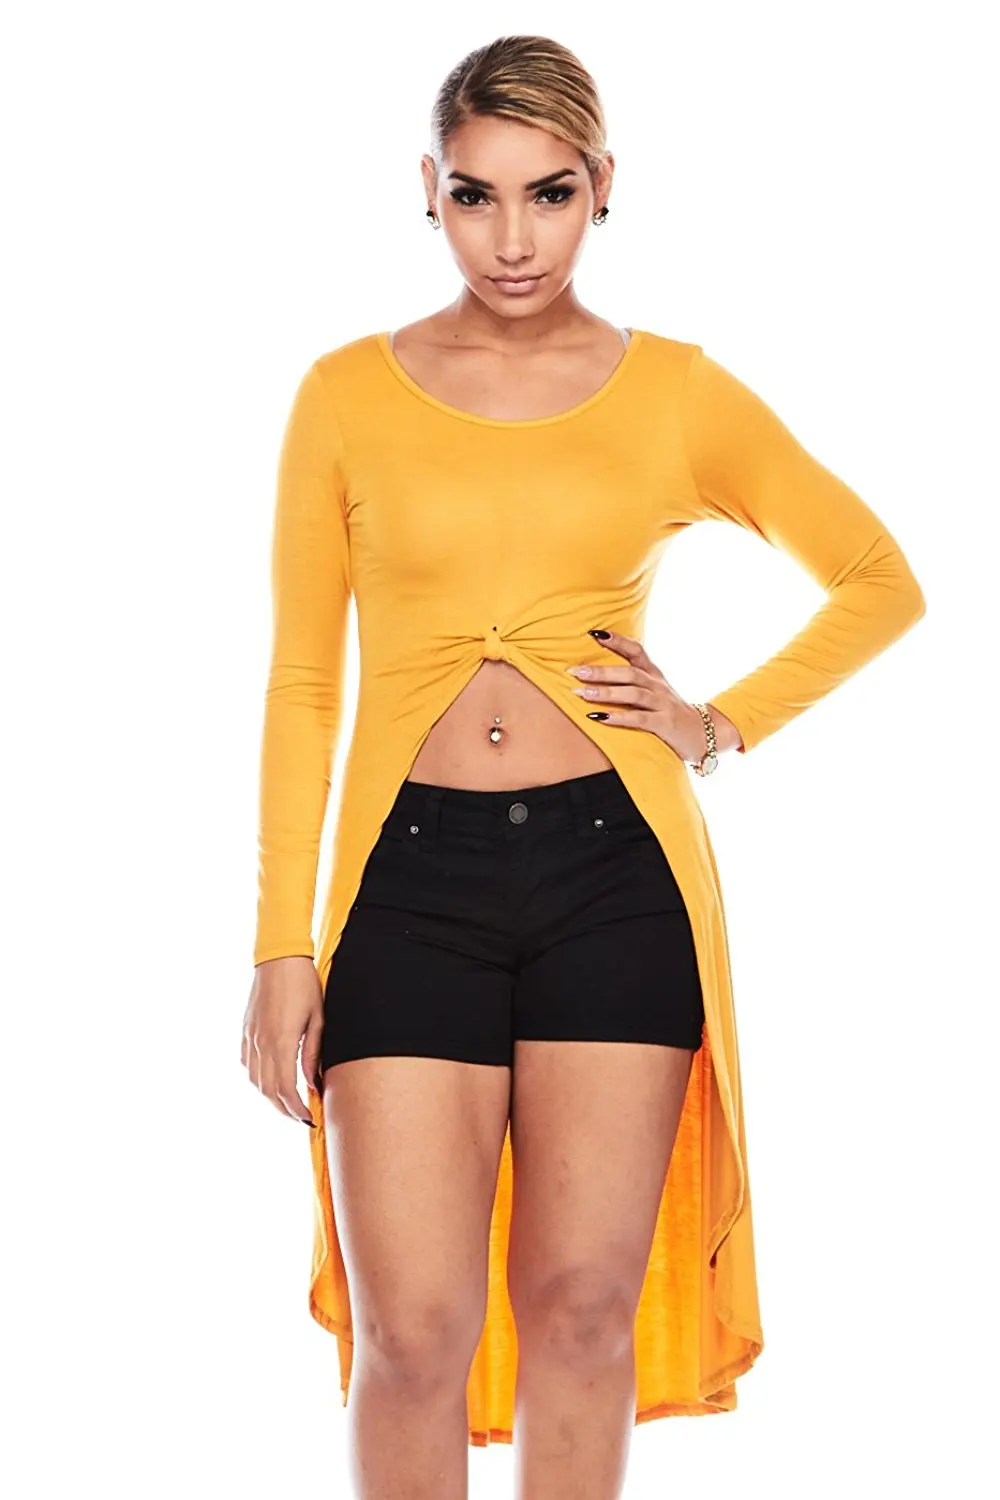 Cheap Crop Top Midriff Find Crop Top Midriff Deals On Line At